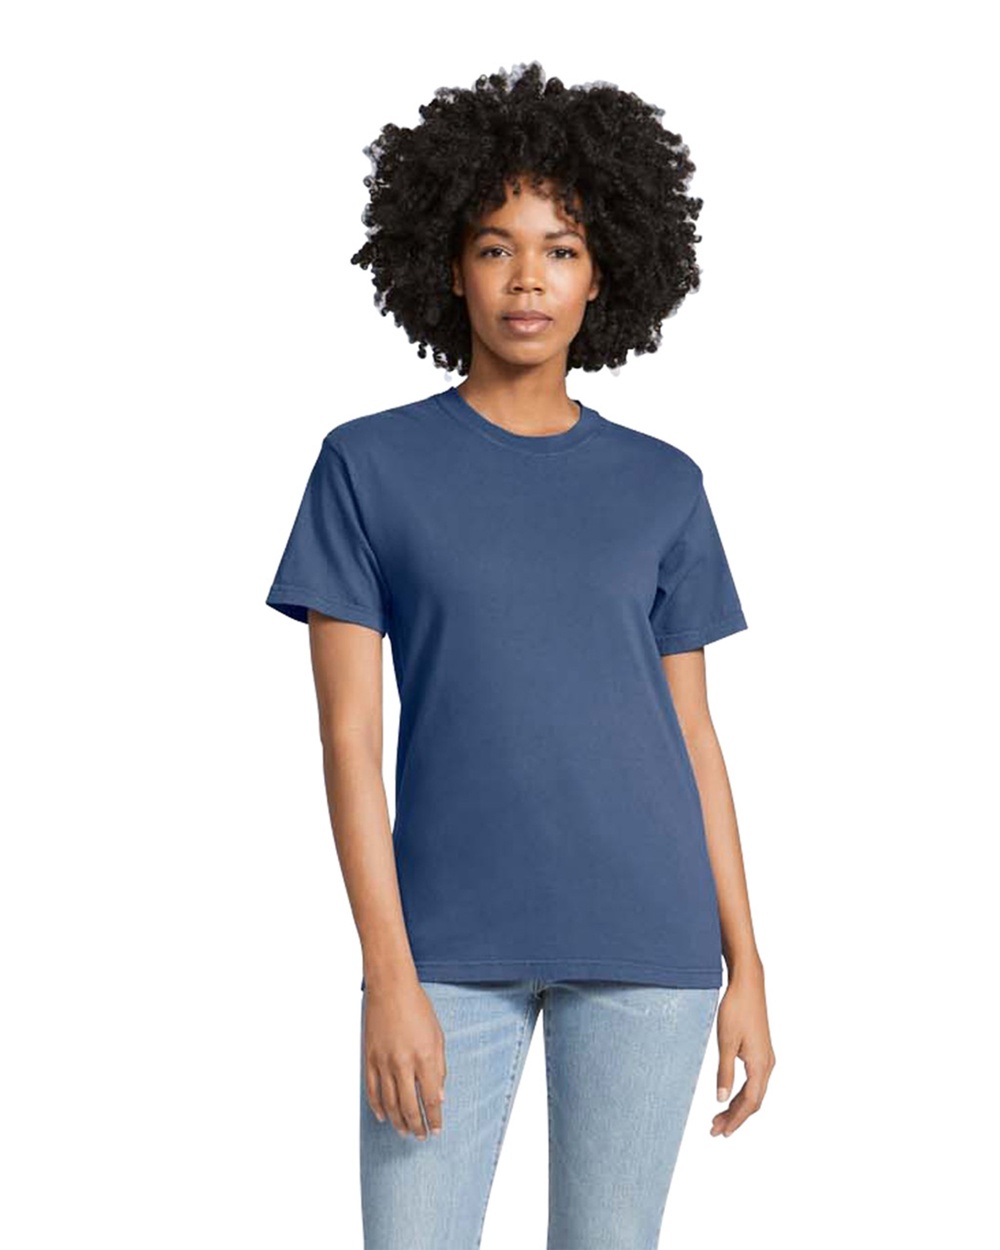 Comfort Colors 1717 Garment-Dyed Unisex Wholesale Heavyweight Tee